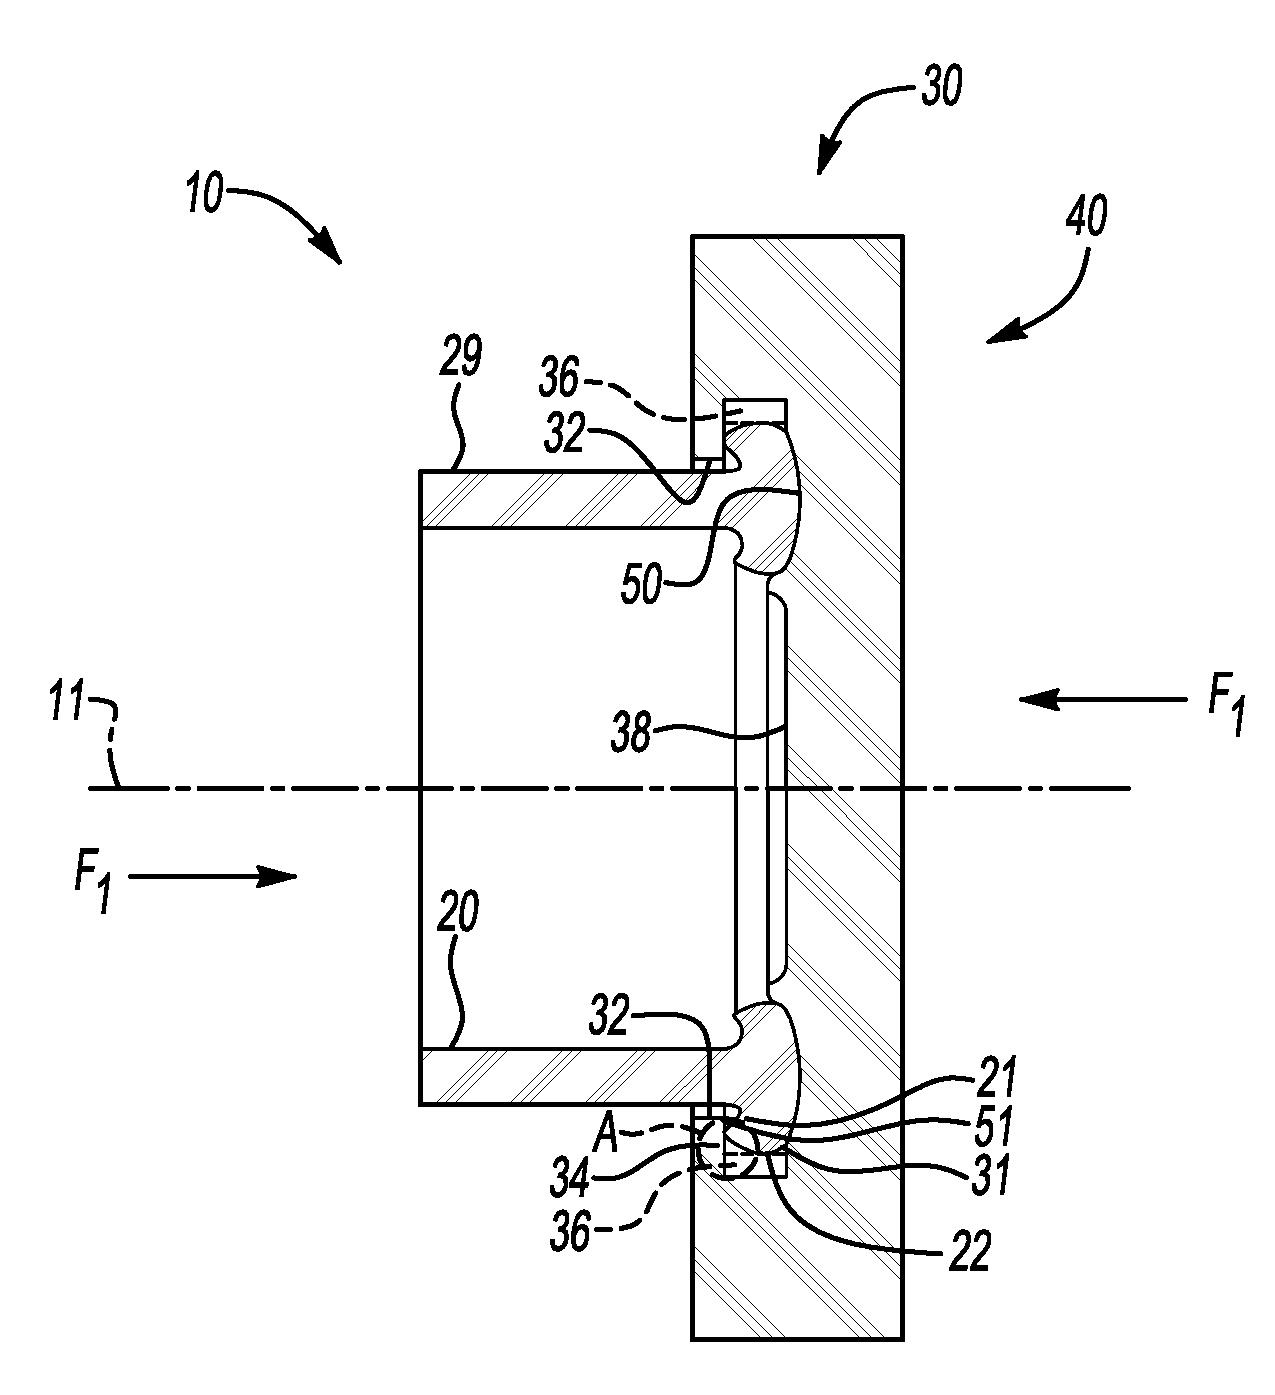 Friction-welded assembly with interlocking feature and method for forming the assembly